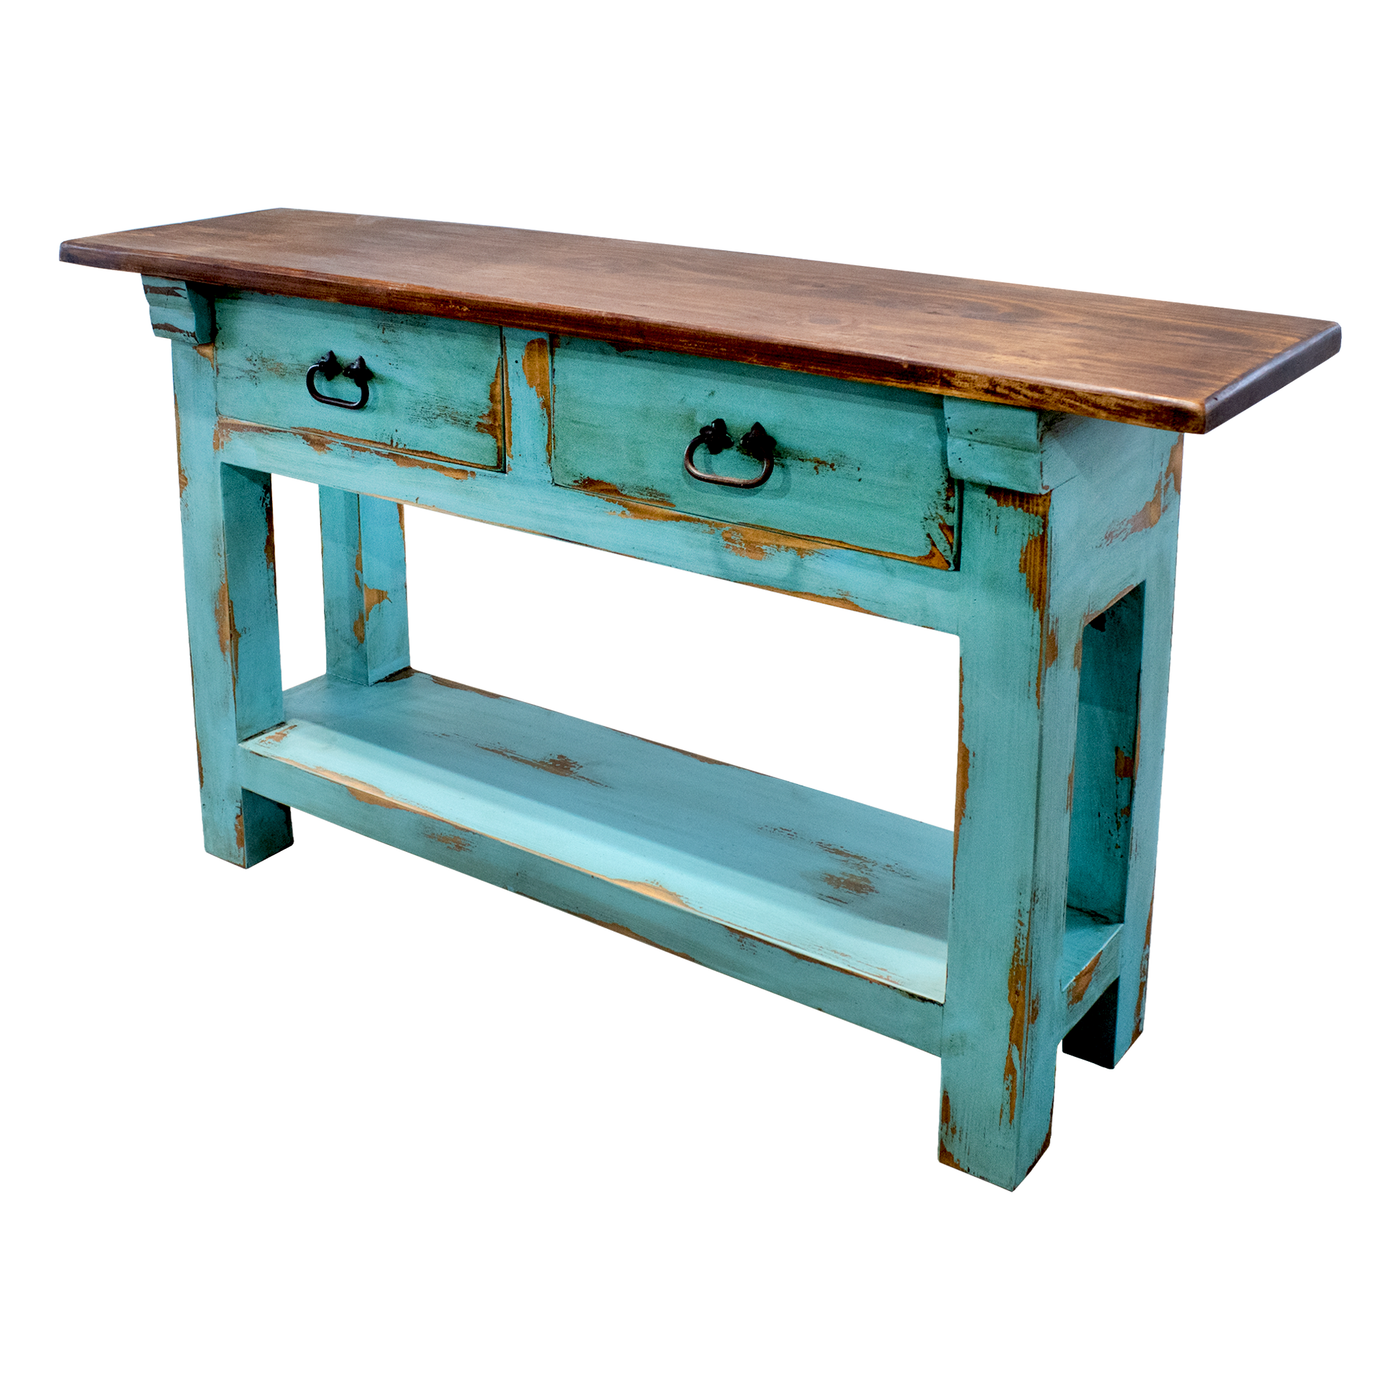 Large Cabinet for storage in Oldie Turquoise – Rustics for Less